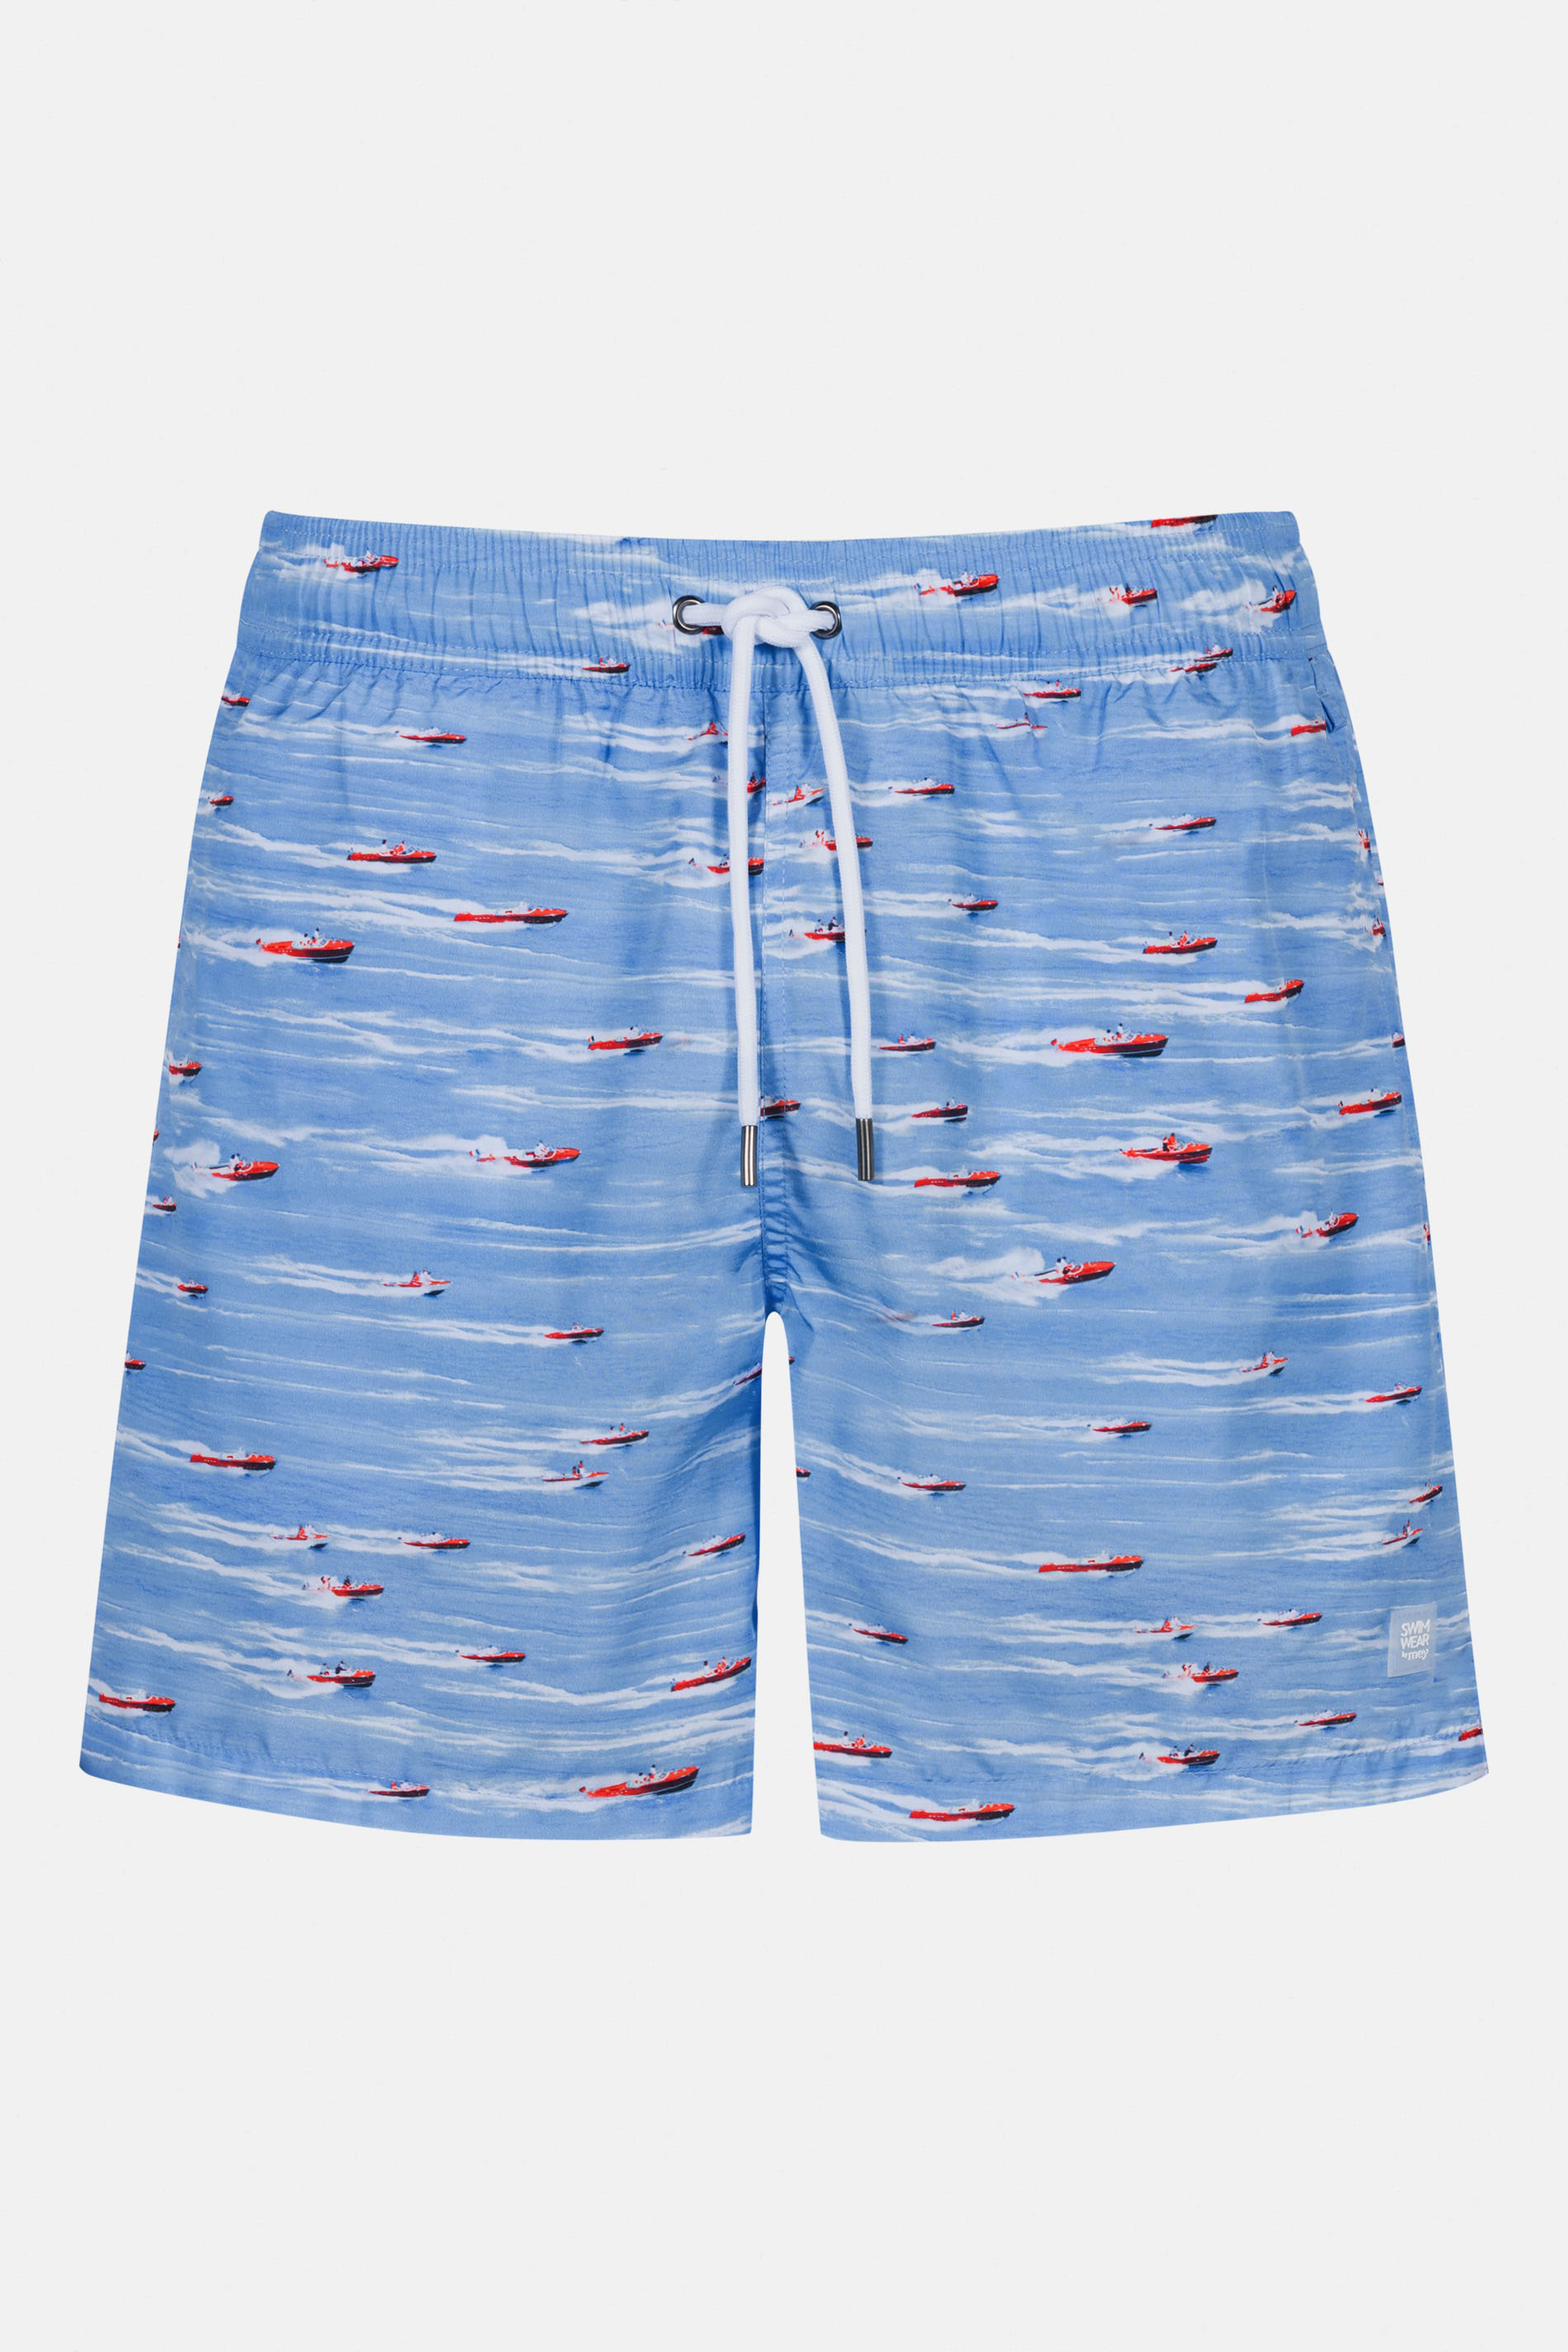 Zwemshorts Serie Racing Boat Uitknippen | mey®